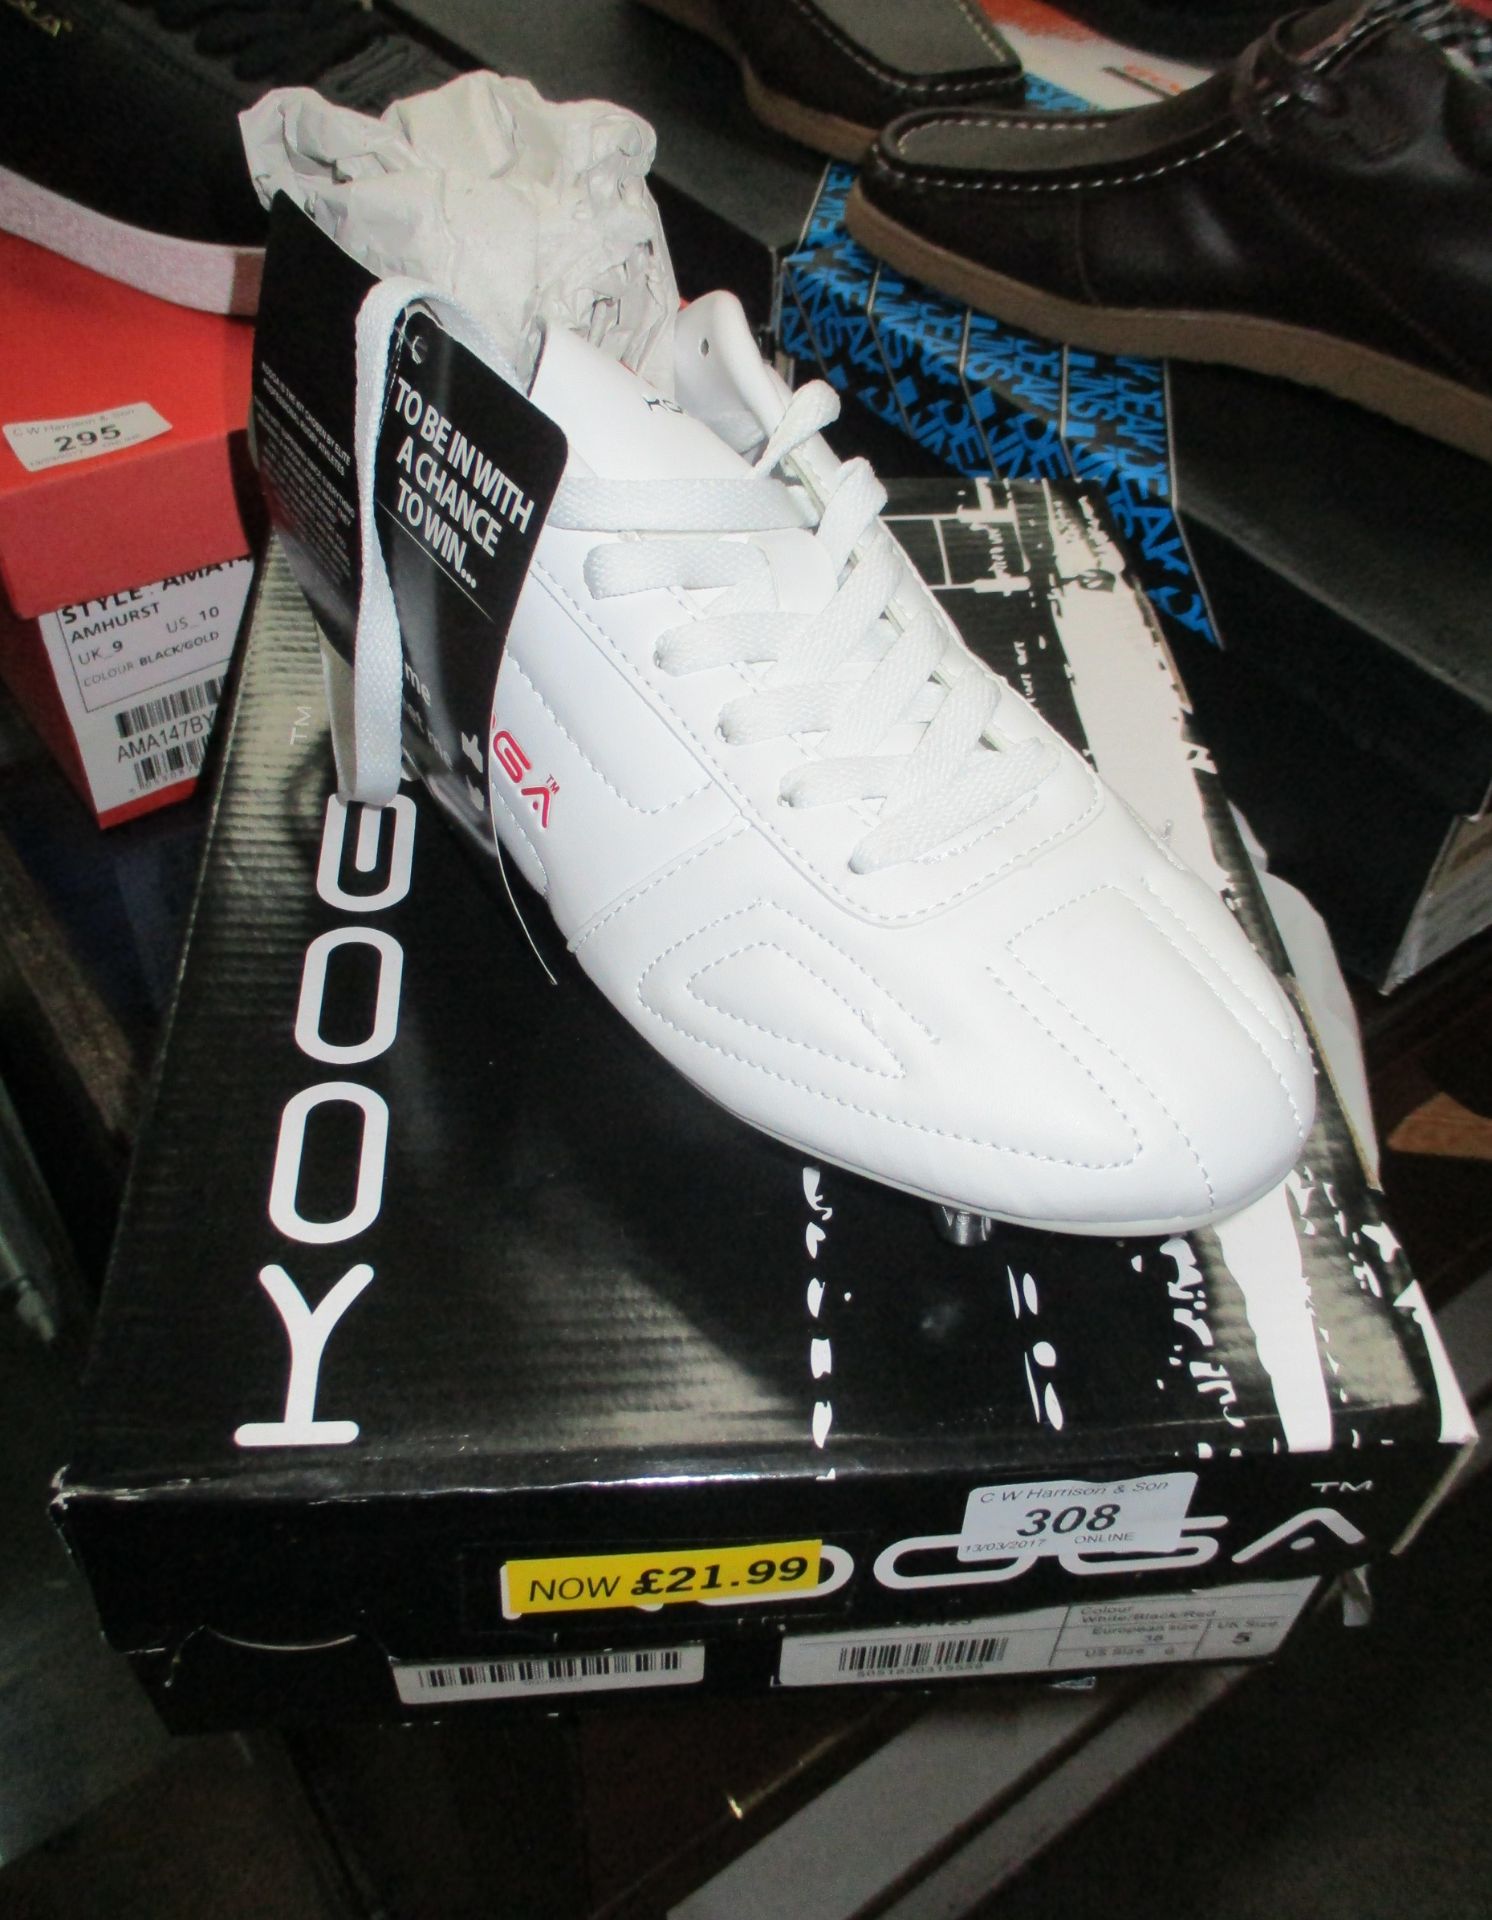 A pair of Kooga Jr rugby boots size 5